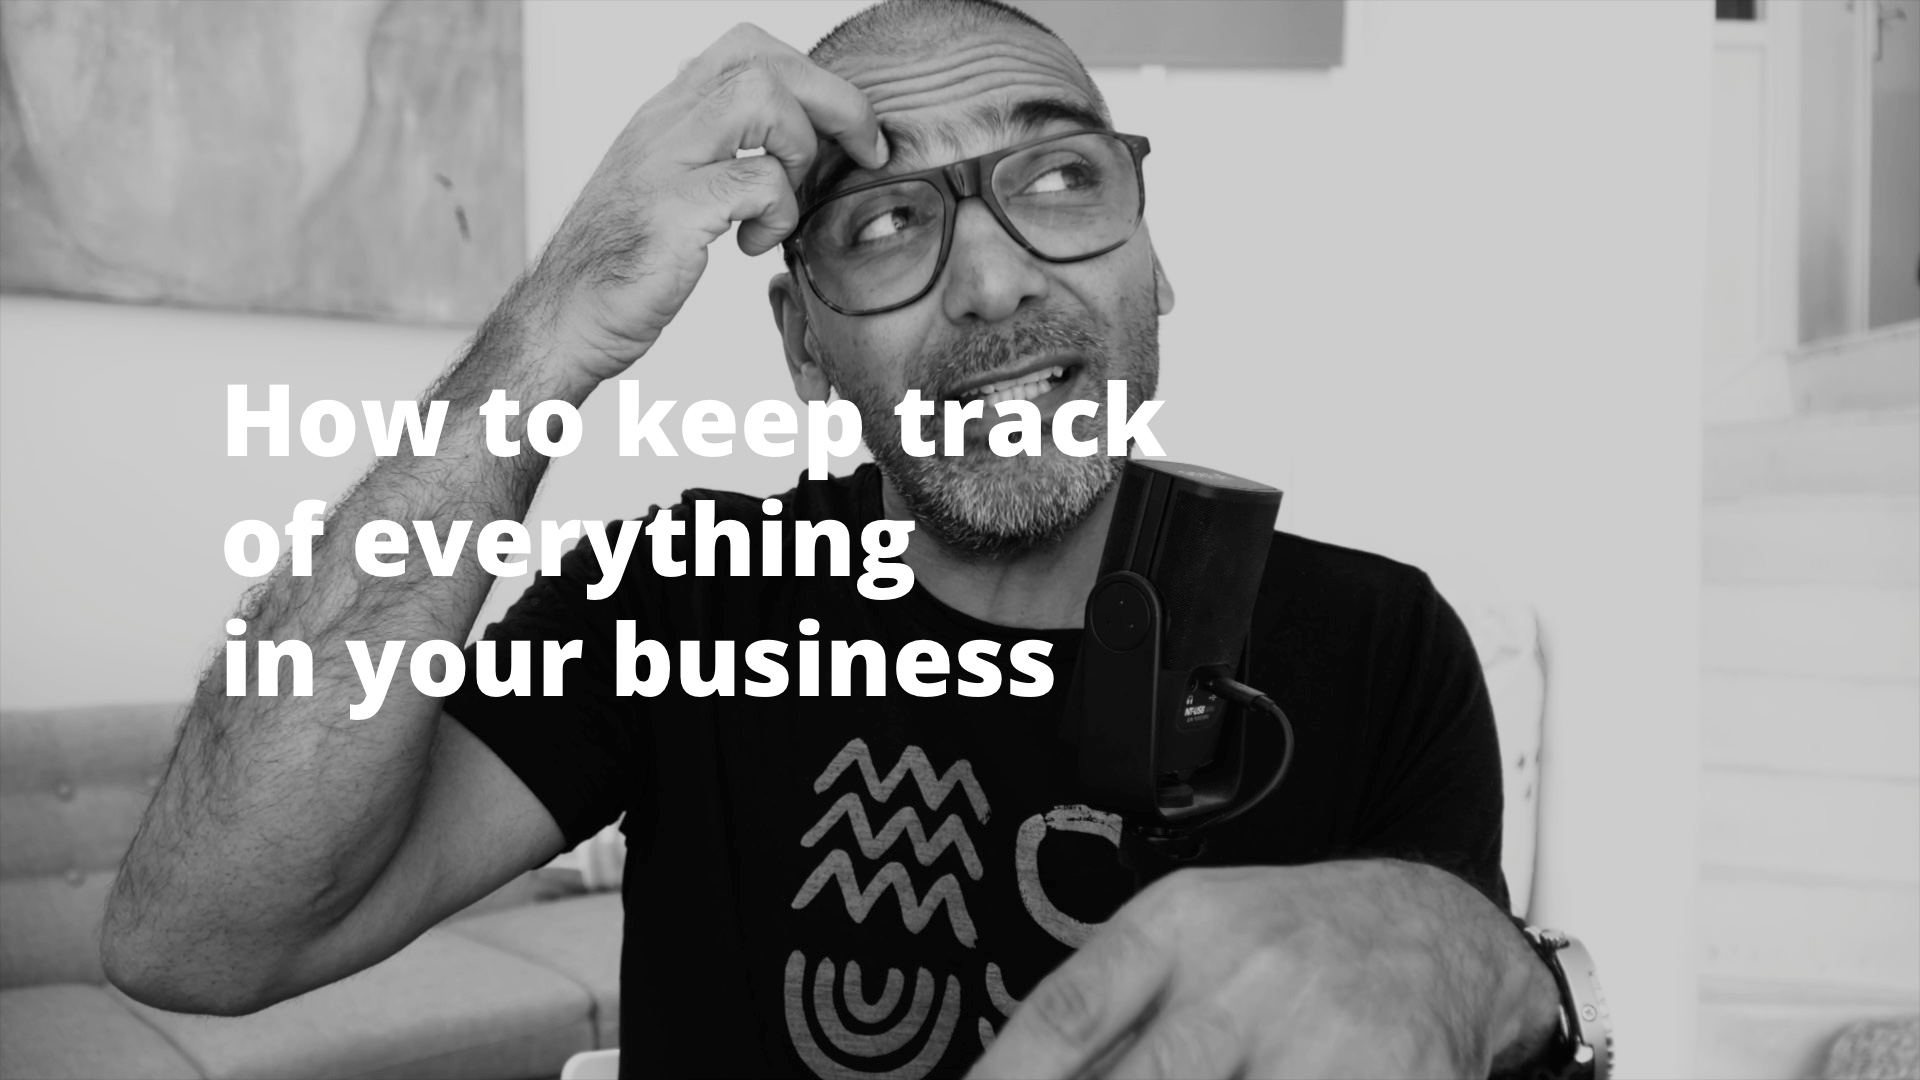 How to keep track of everything in your business